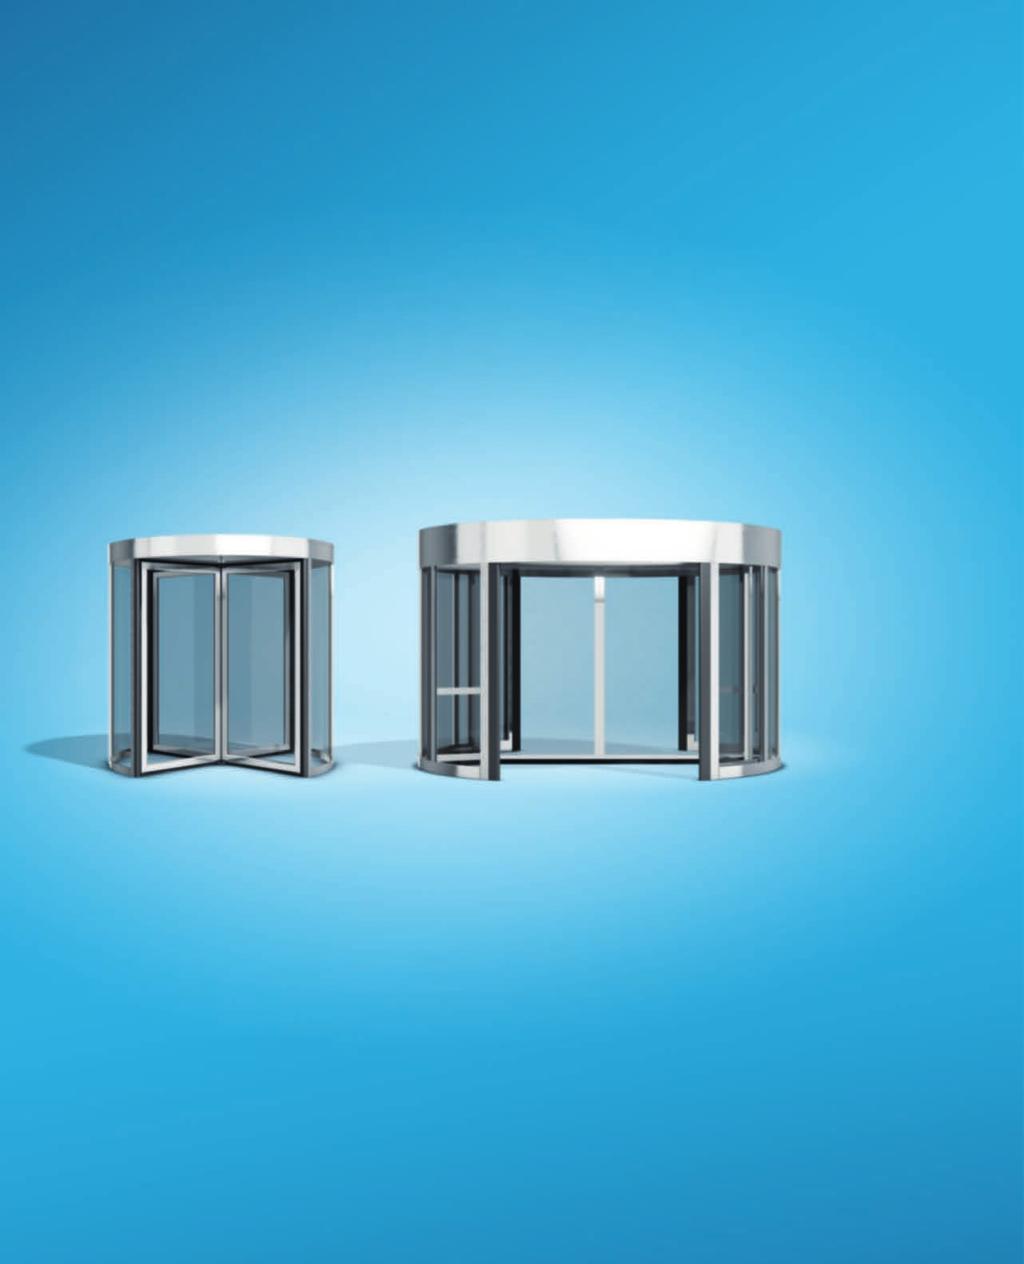 The range you can rely on The ASSA ABLOY revolving door range from ASSA ABLOY Entrance Systems has an entrance solution to suit every business need.